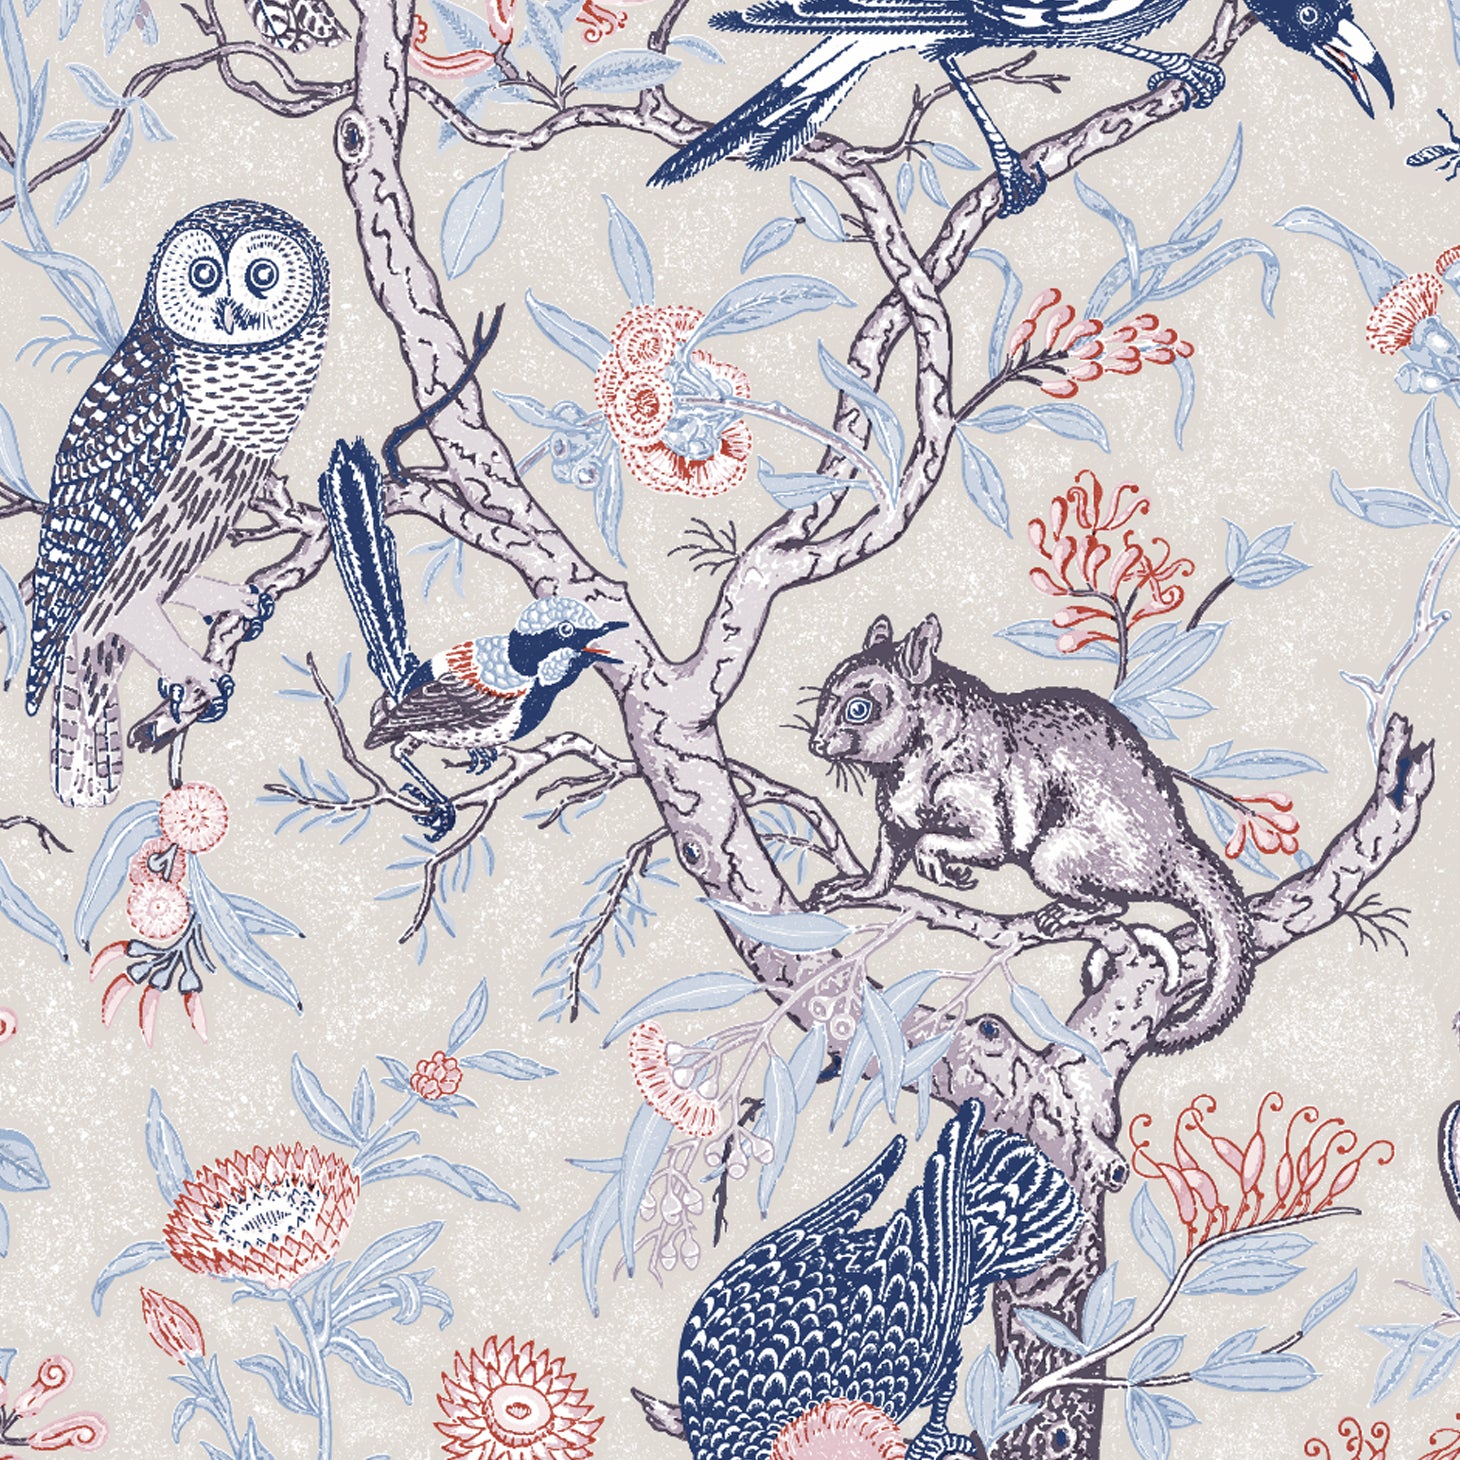 Detail of wallpaper in an animal and tree branch print in shades of blue, gray and red on a cream field.